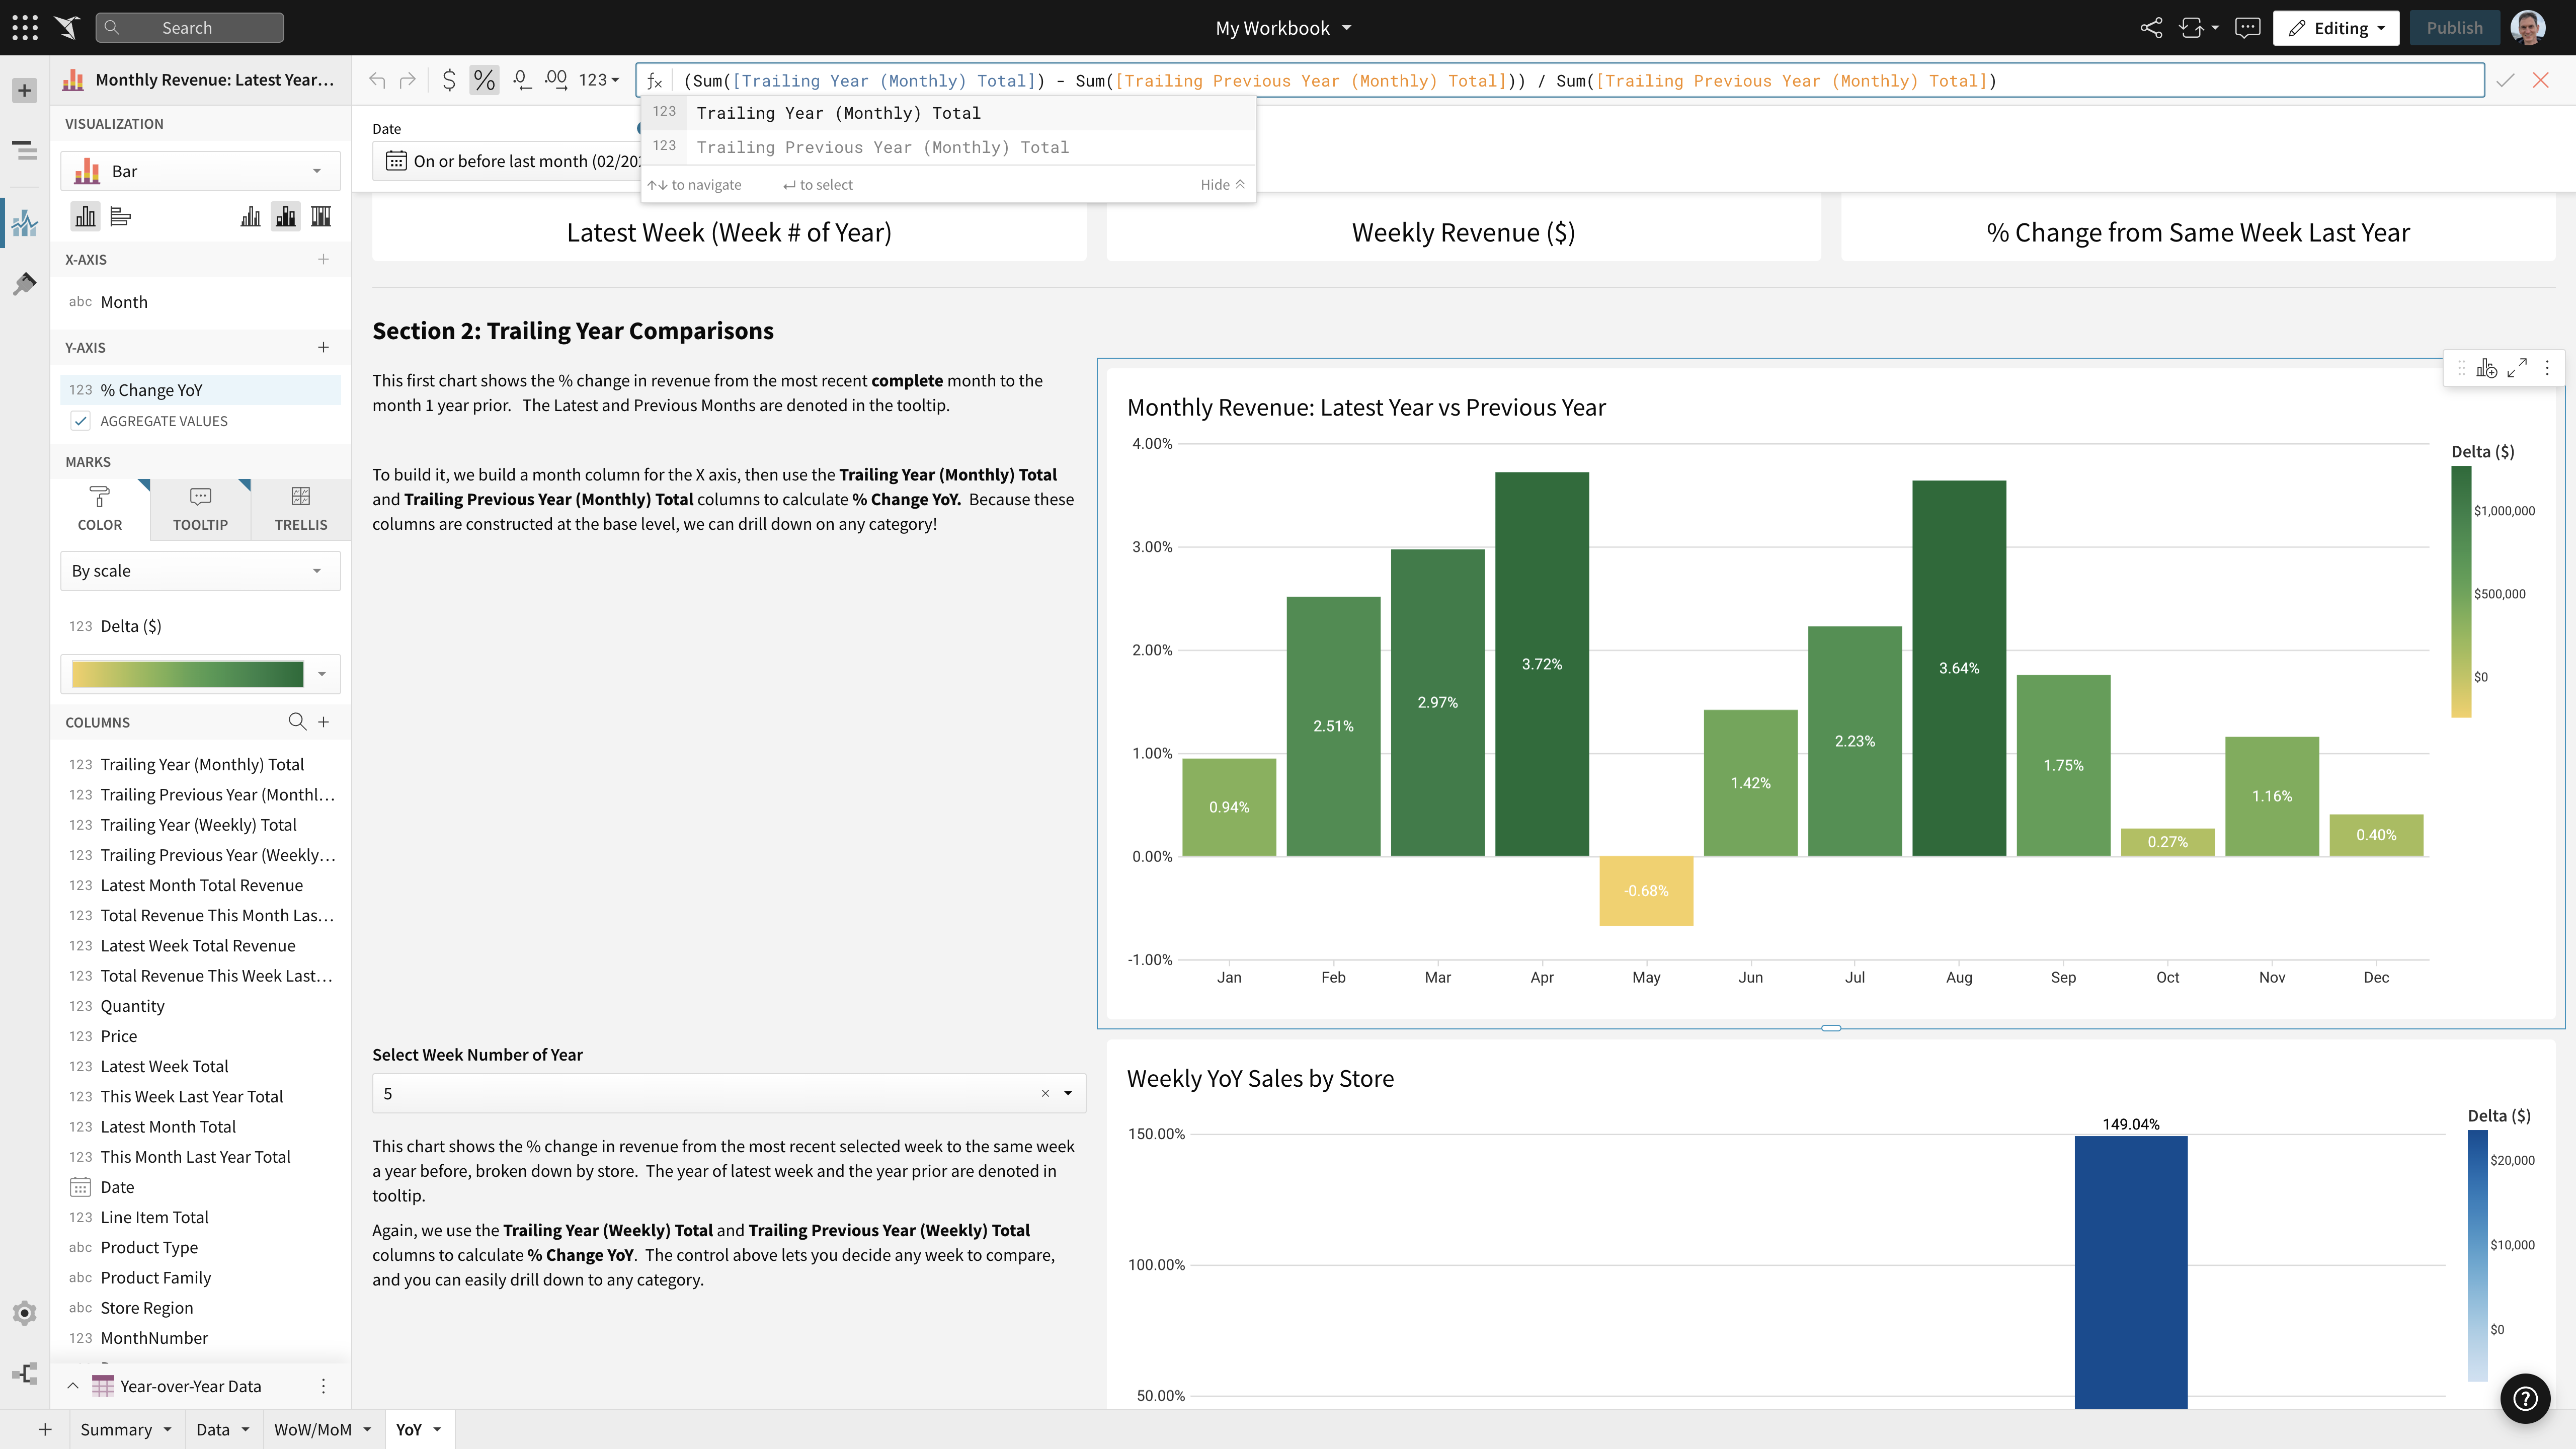 Anyone can add custom calculations to tables and visualizations – no SQL skills necessary.